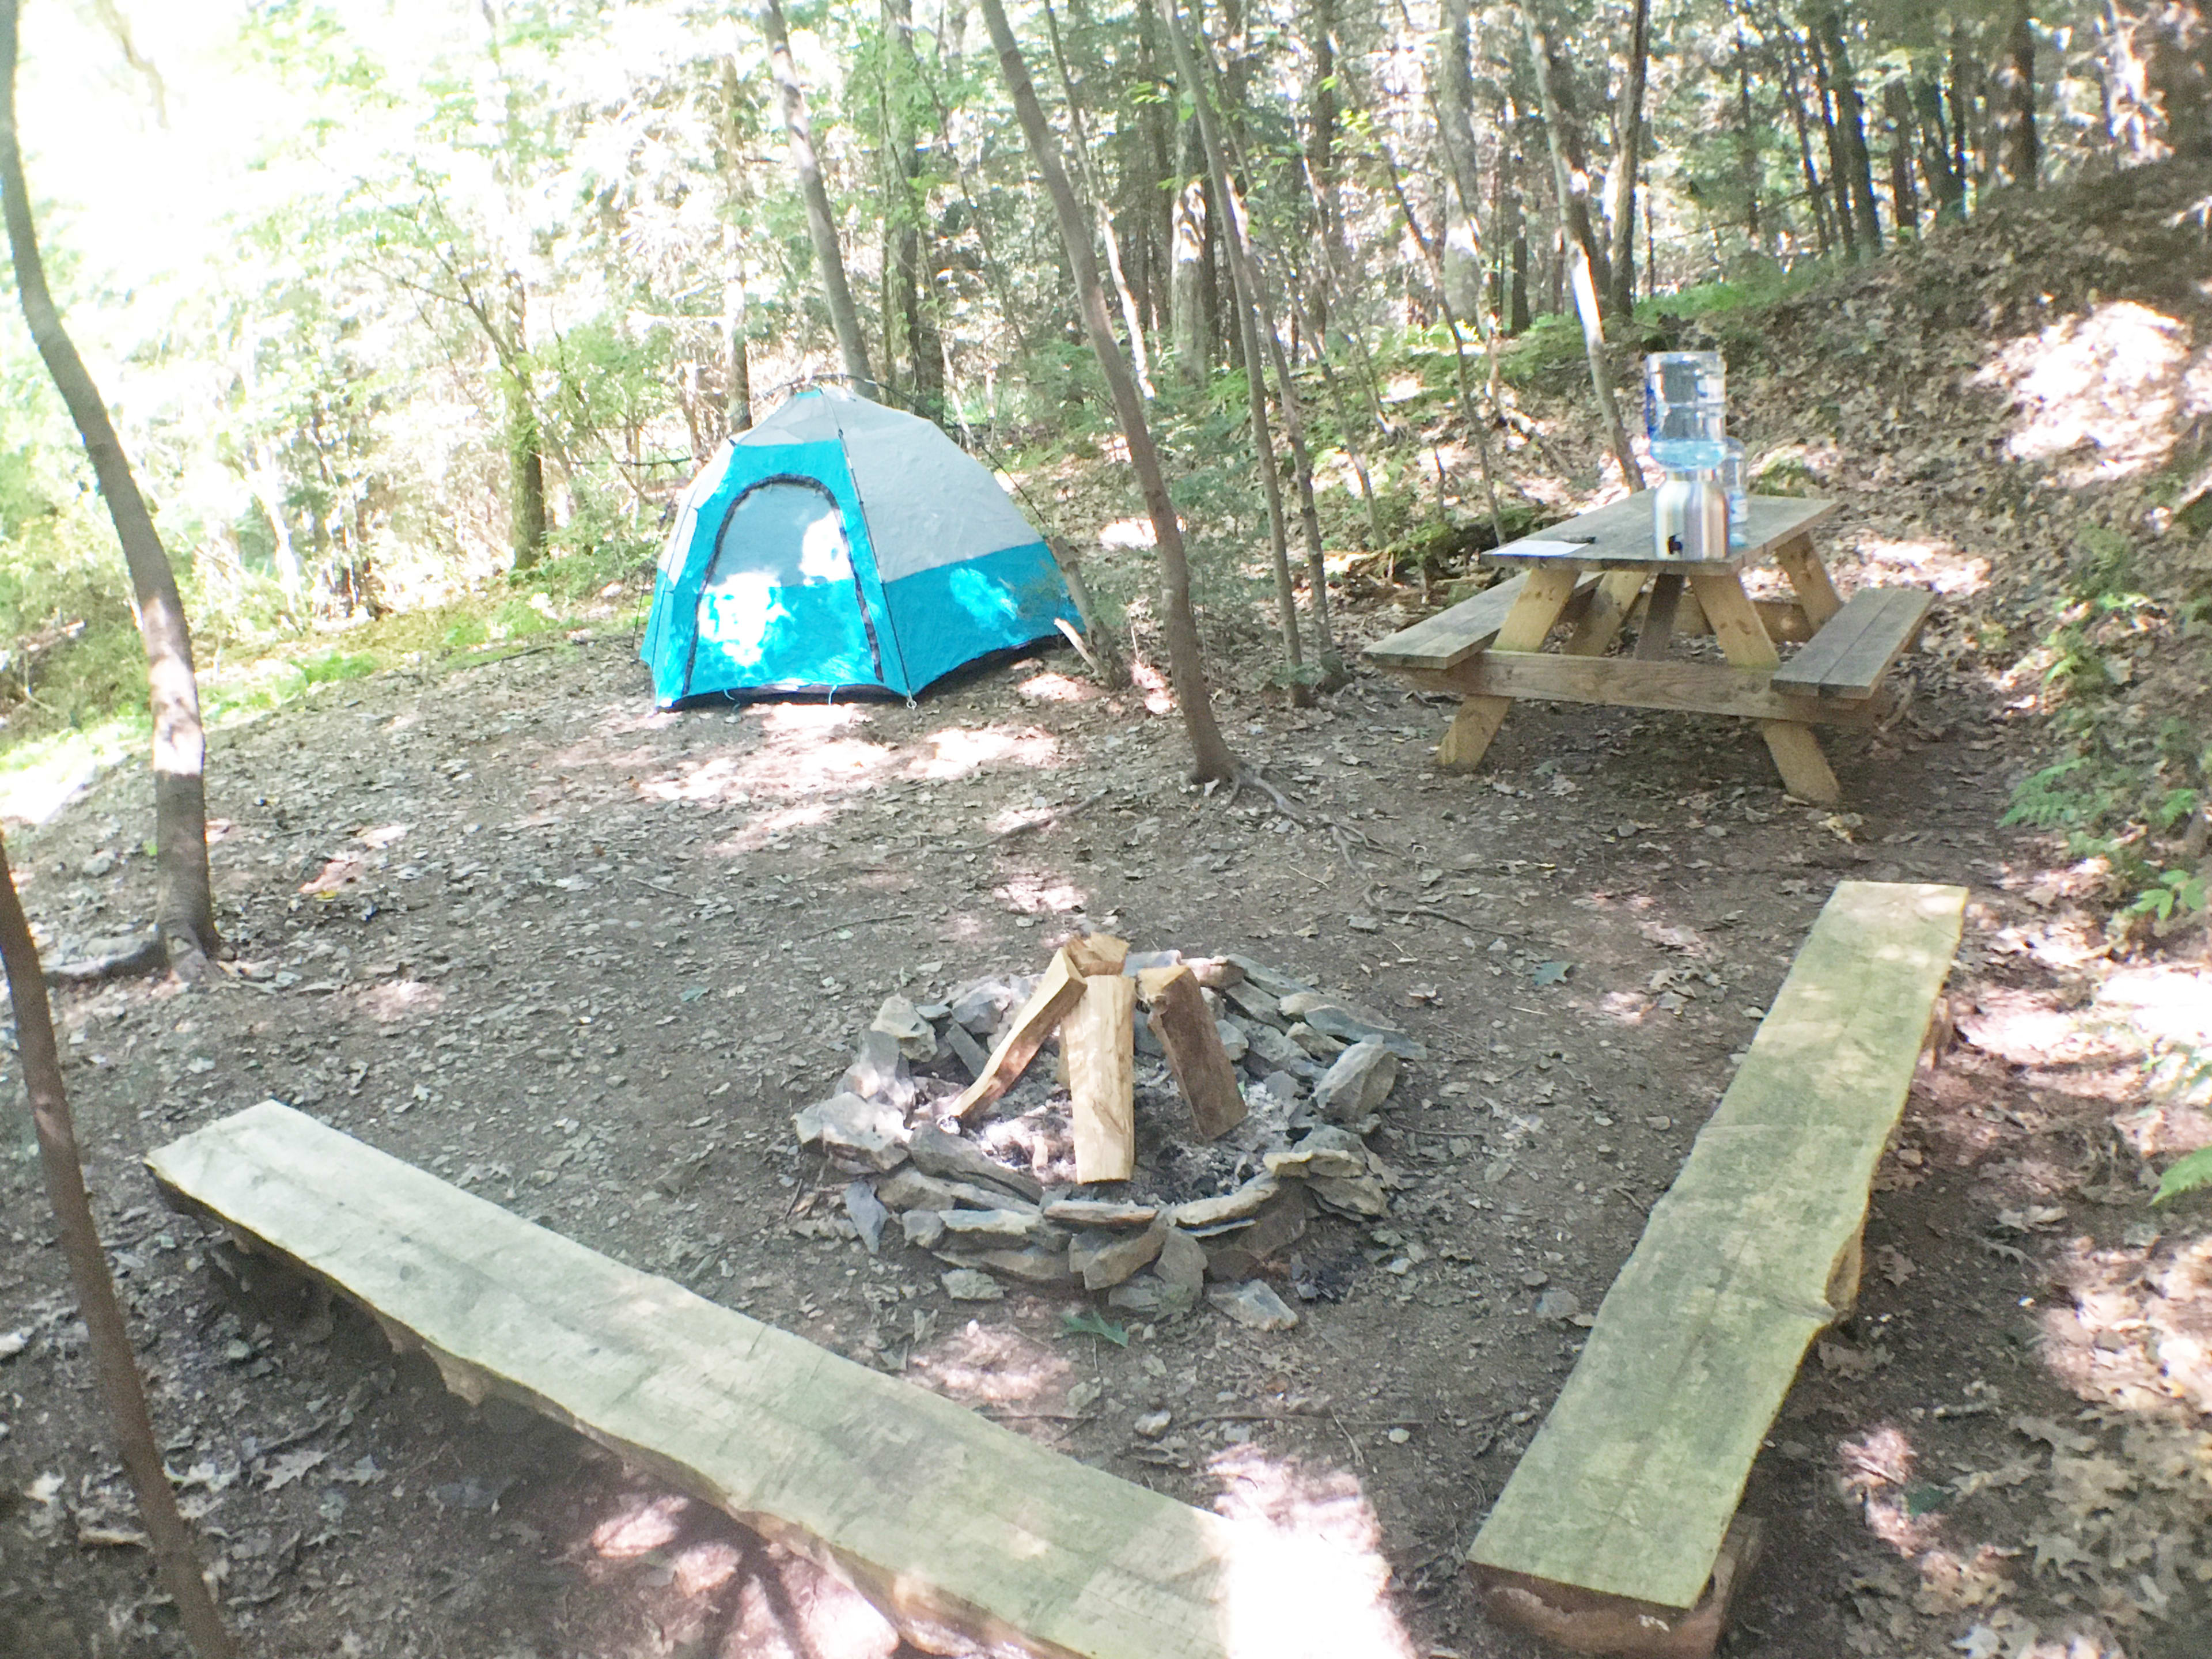 Campsite2 has its own campfire area, picnic table with unlimited water provided. 